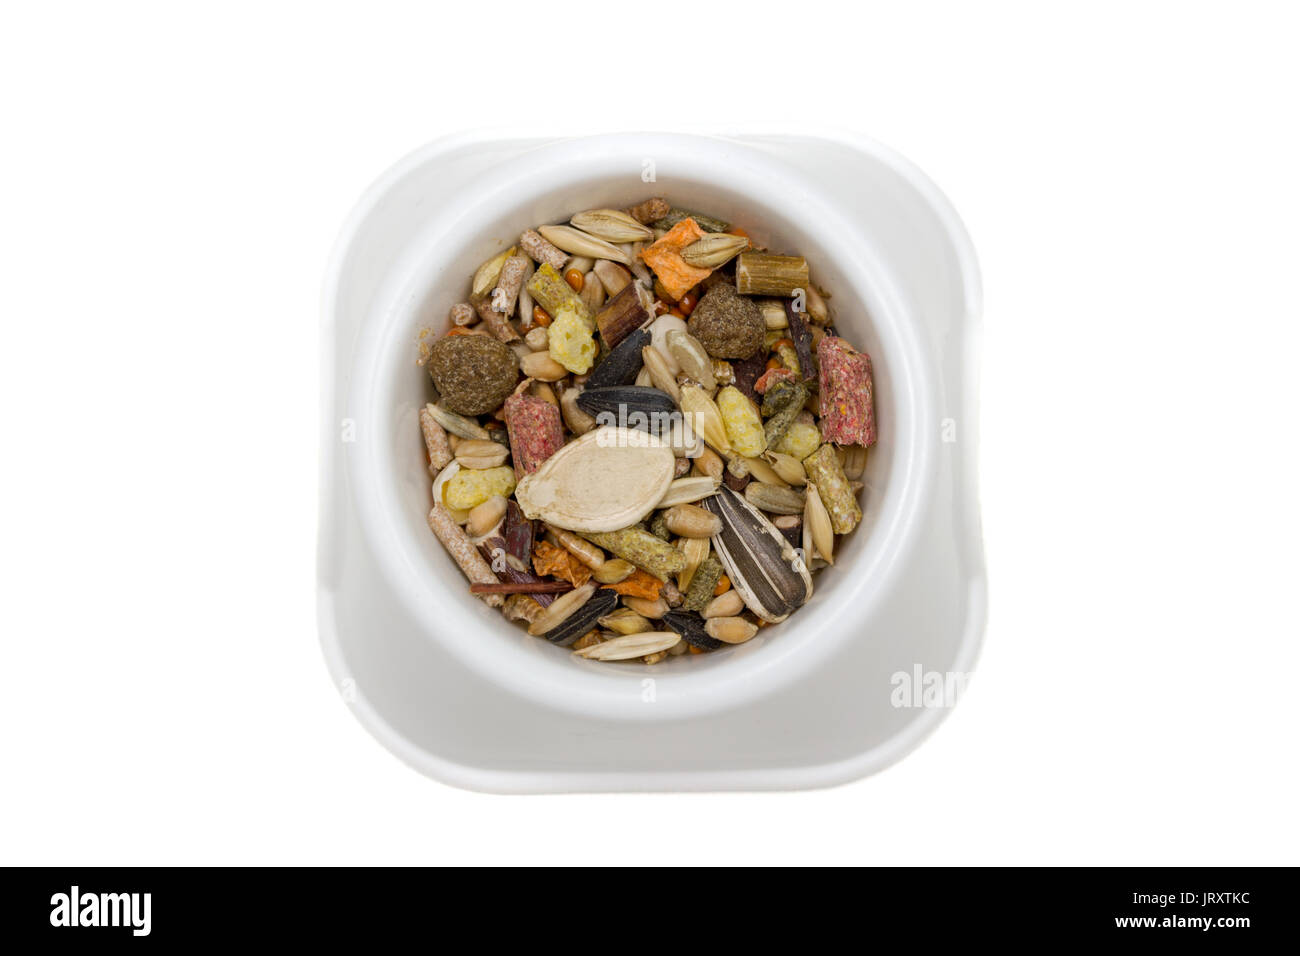 Feeder with grain and cereal feed for rodents Stock Photo